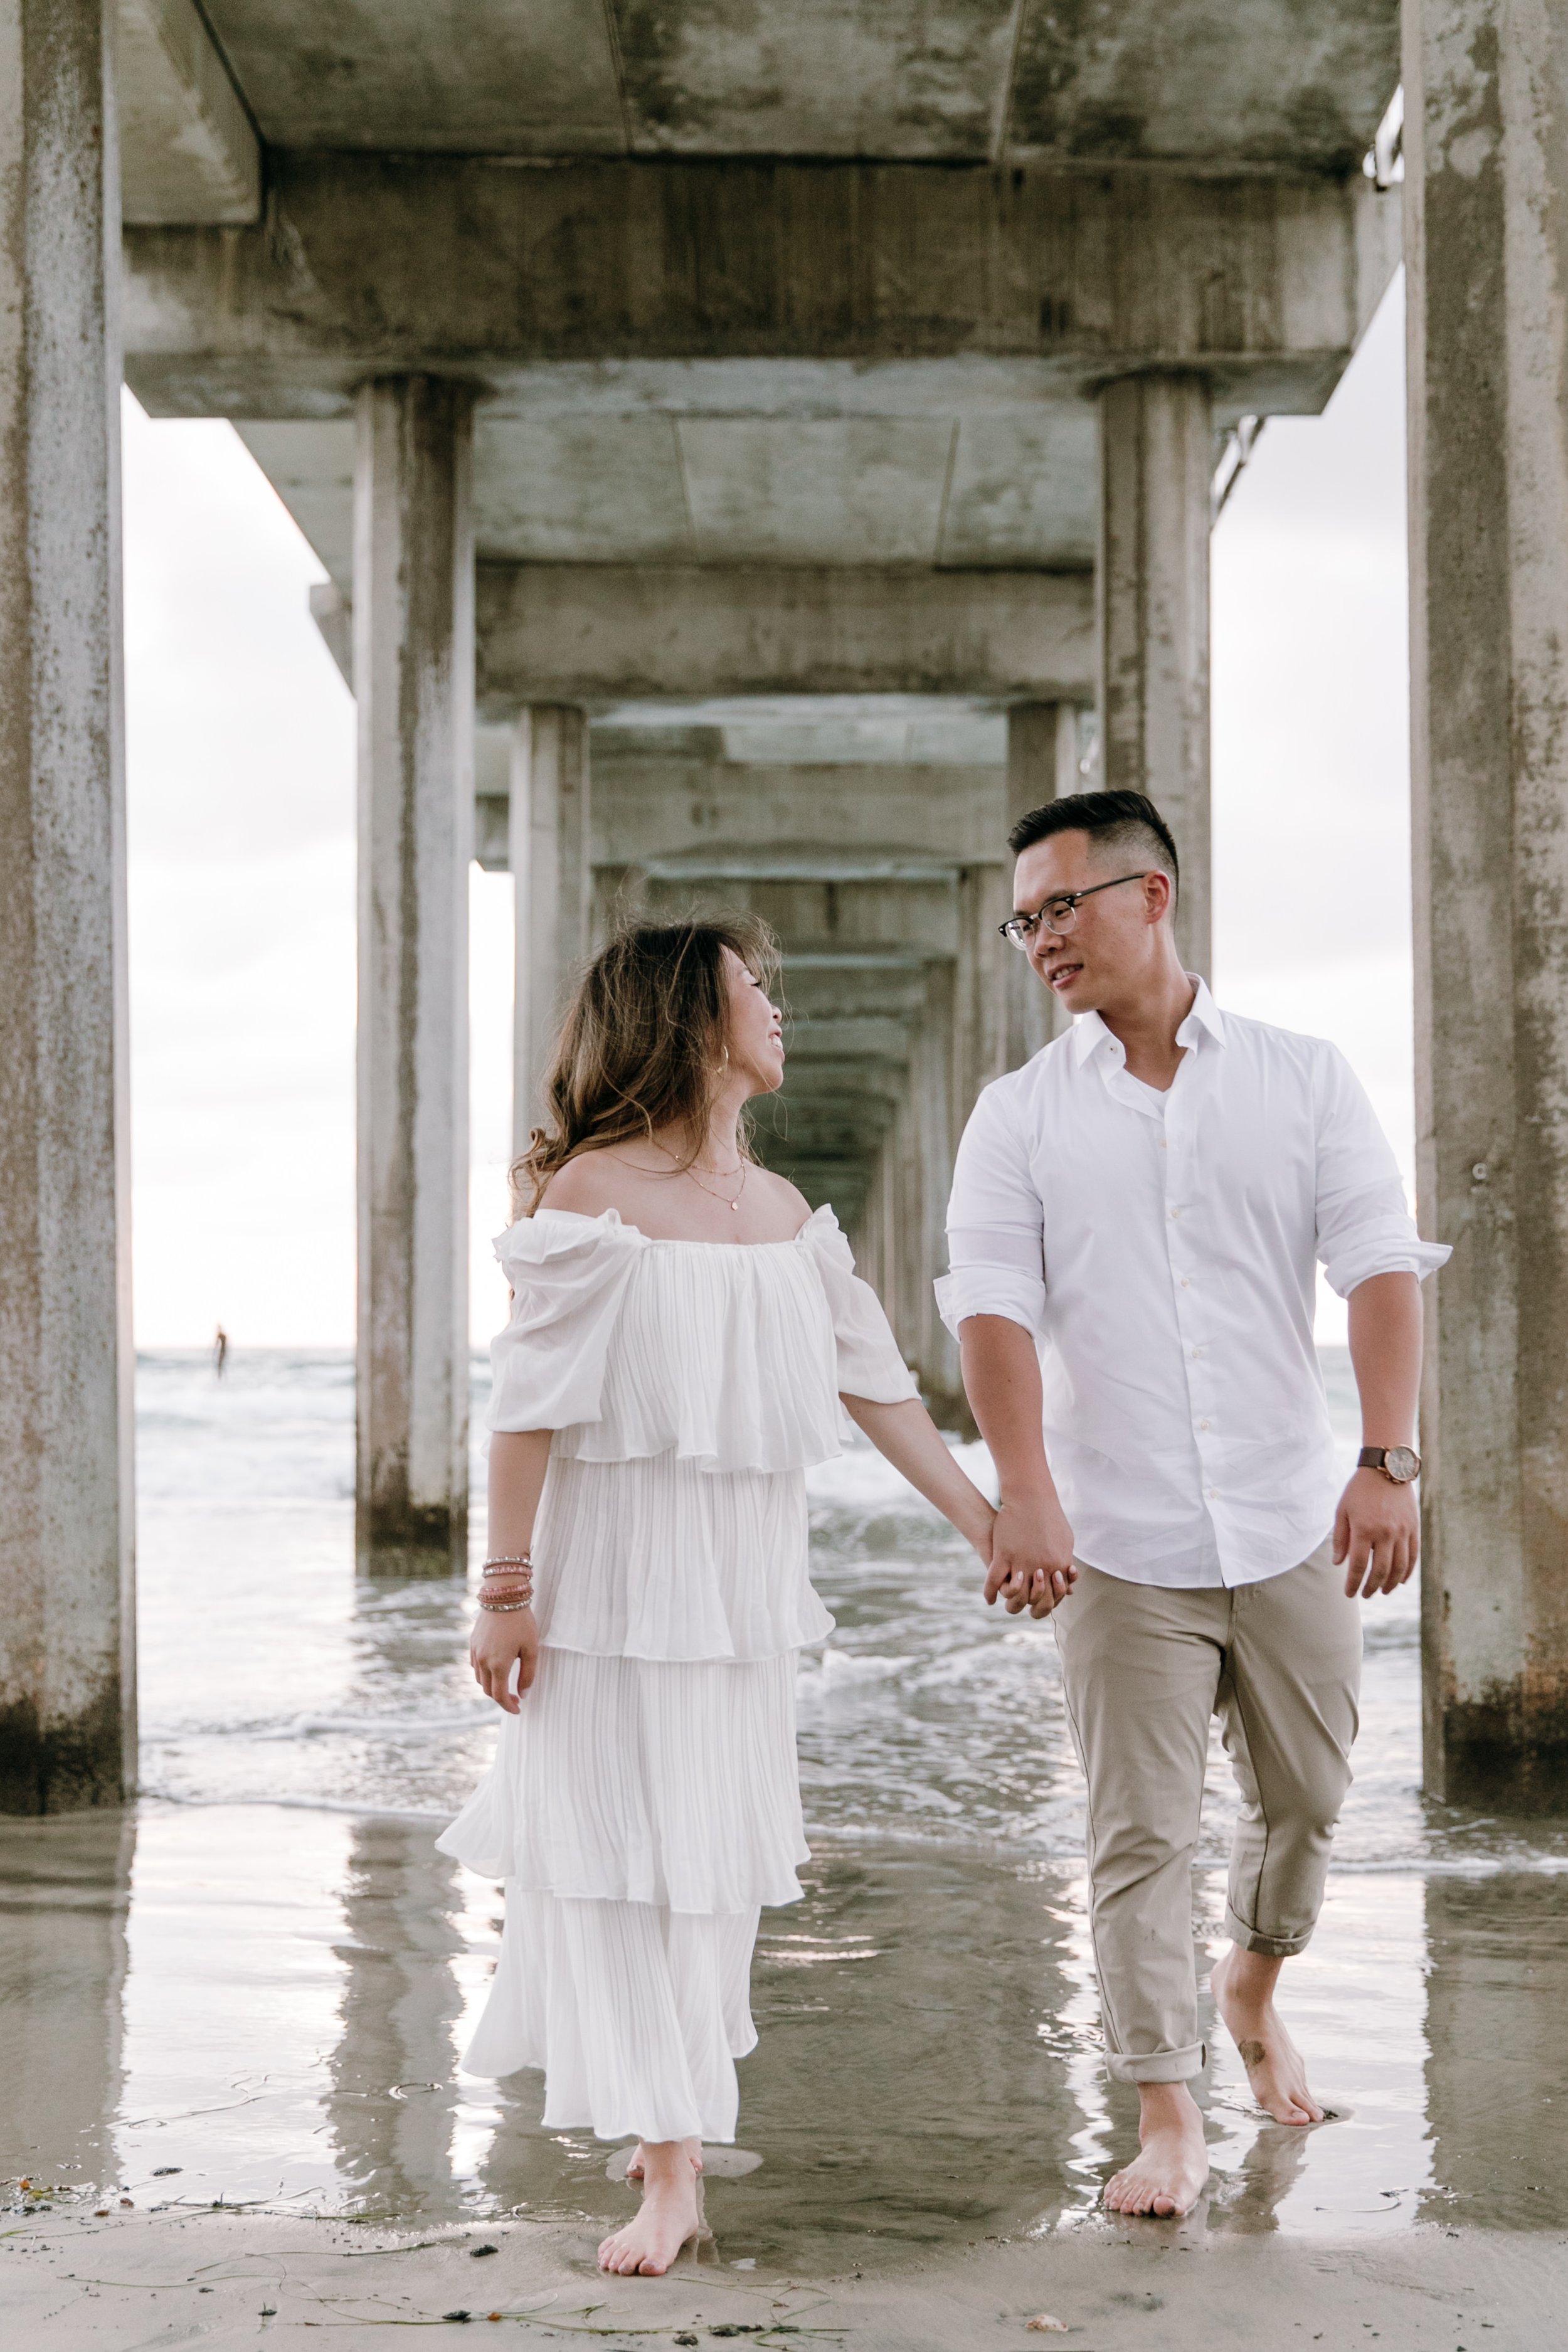 San Diego engagement photographer, SD Engagement photographer, La Jolla engagement photographer, La Jolla engagement session, Southern California Engagement Photographer, Scripps Pier Engagement